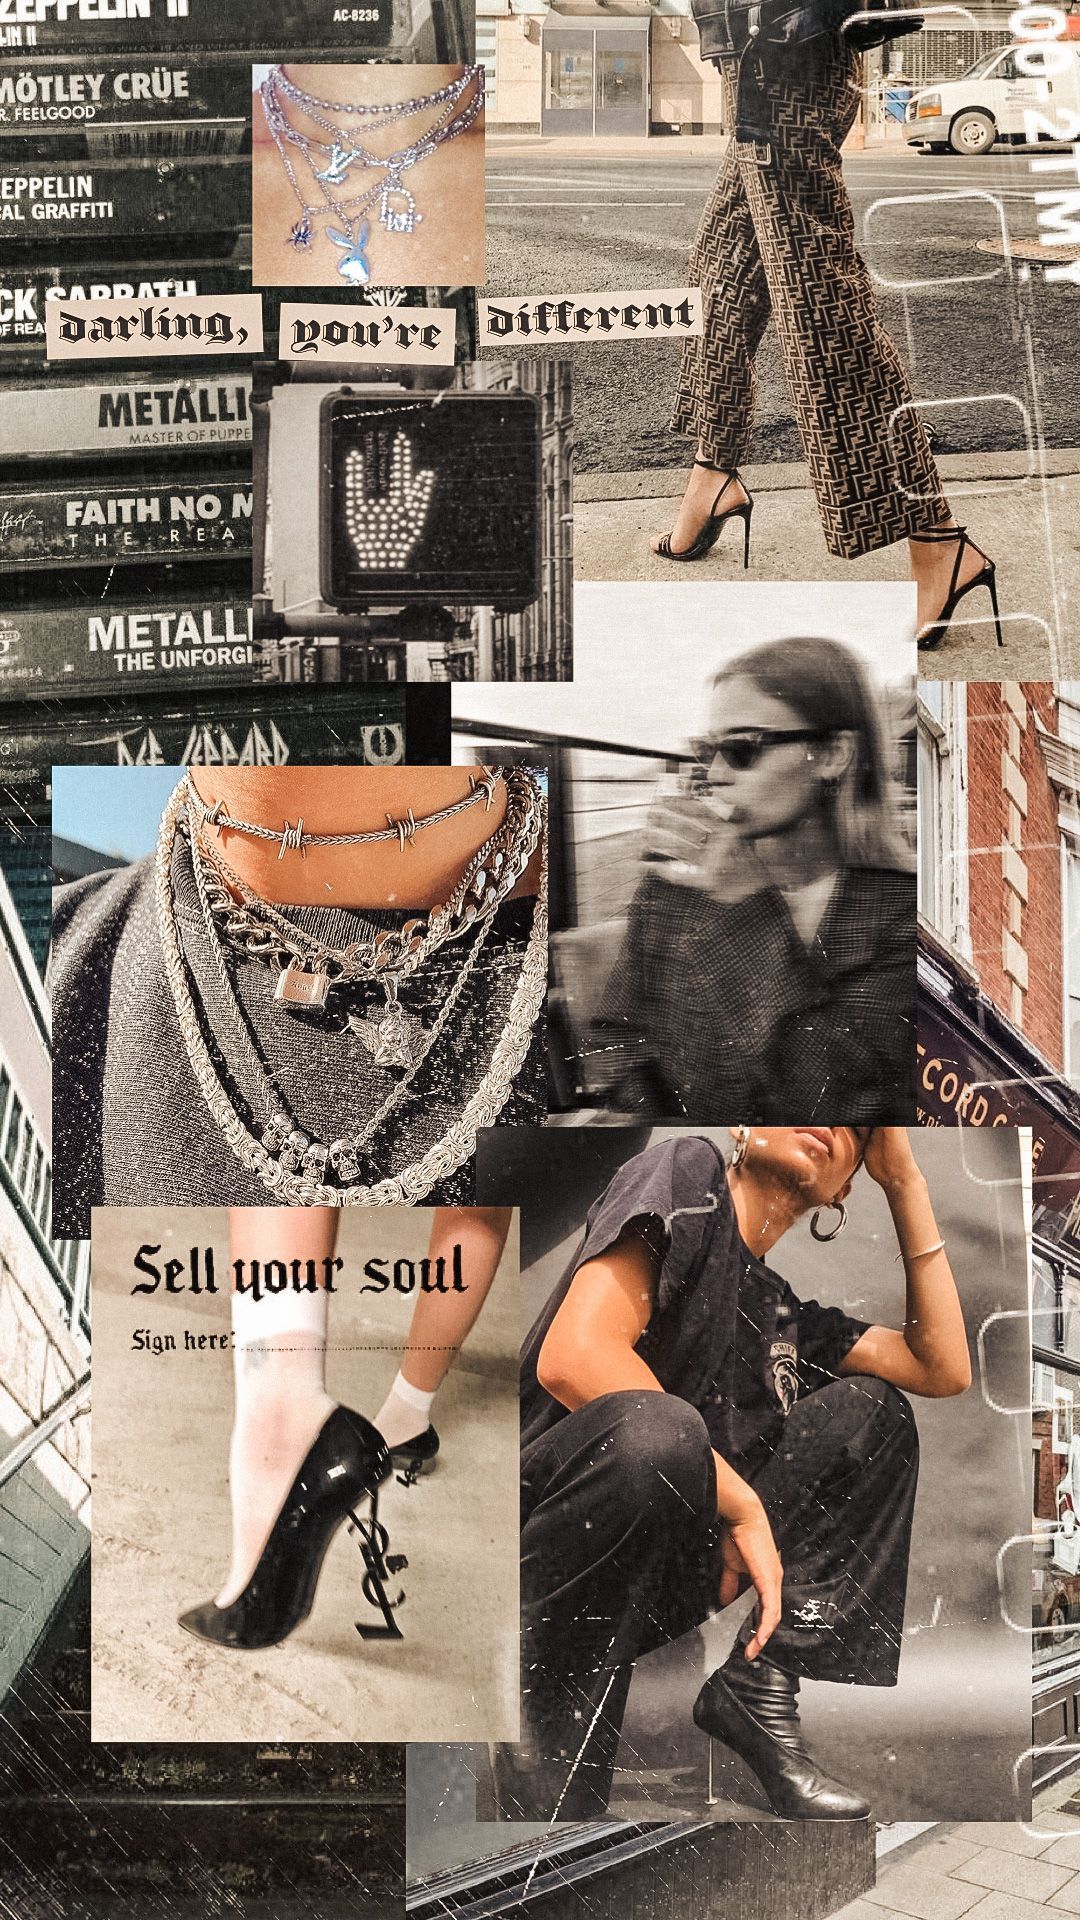 Fashion Aesthetic Collage Psiho Moodboard Mix Stock Photo 1648860844   Shutterstock